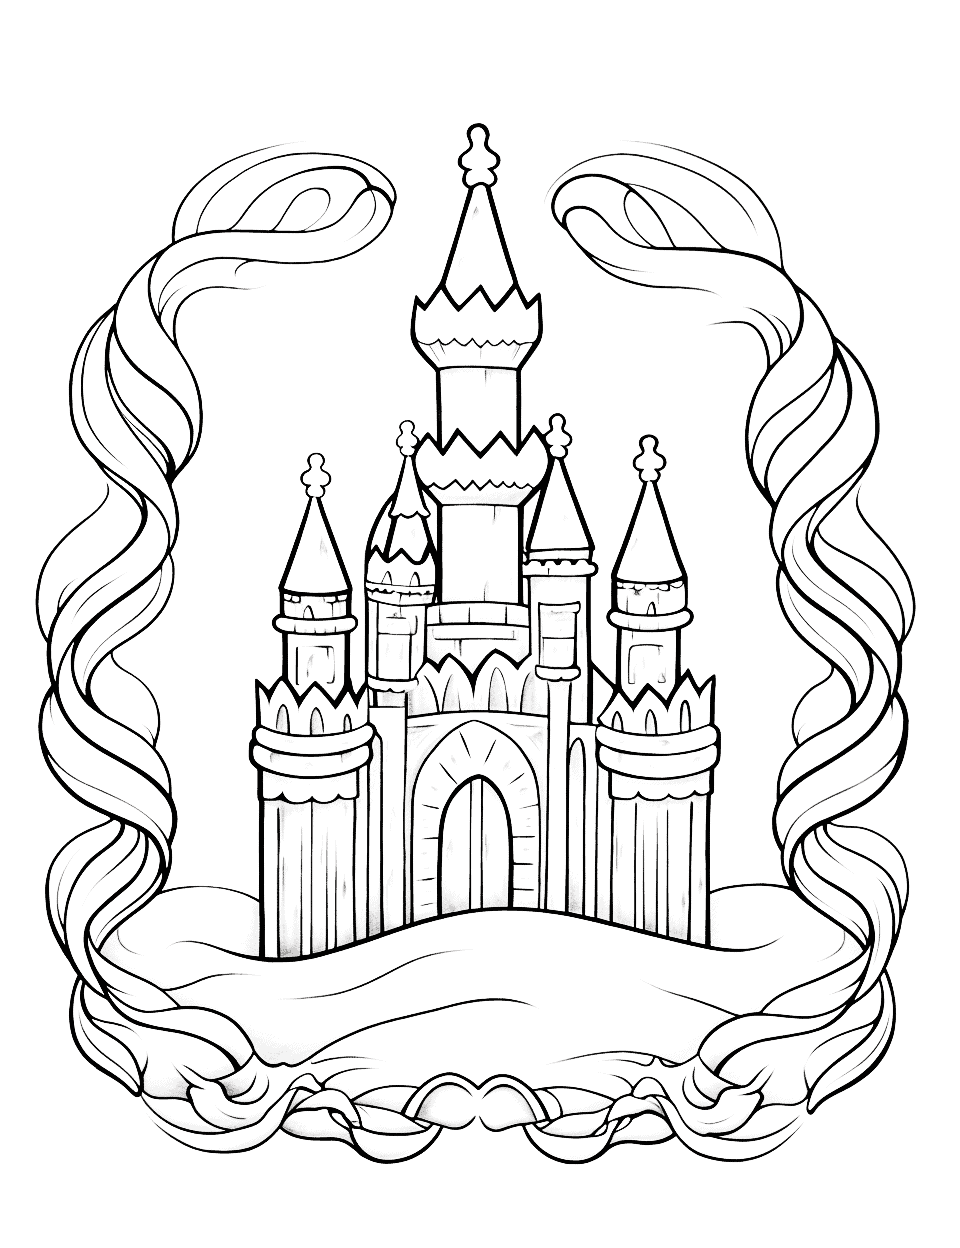 Ice Castle Christmas Coloring Page - A sparkling ice castle to celebrate the magic of winter and Christmas.